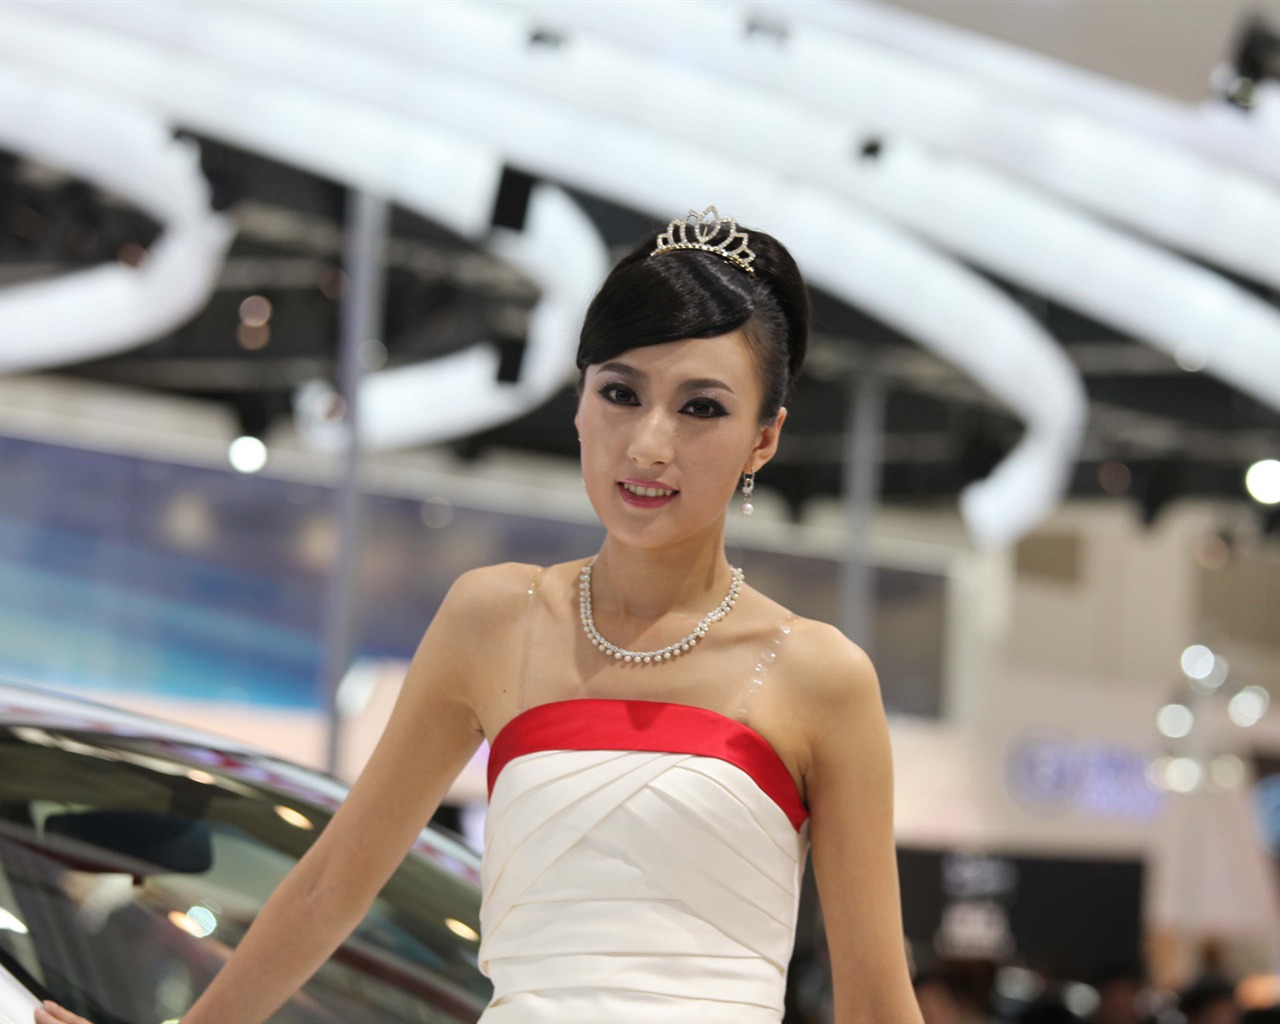 2010 Beijing International Auto Show beauty (1) (the wind chasing the clouds works) #27 - 1280x1024